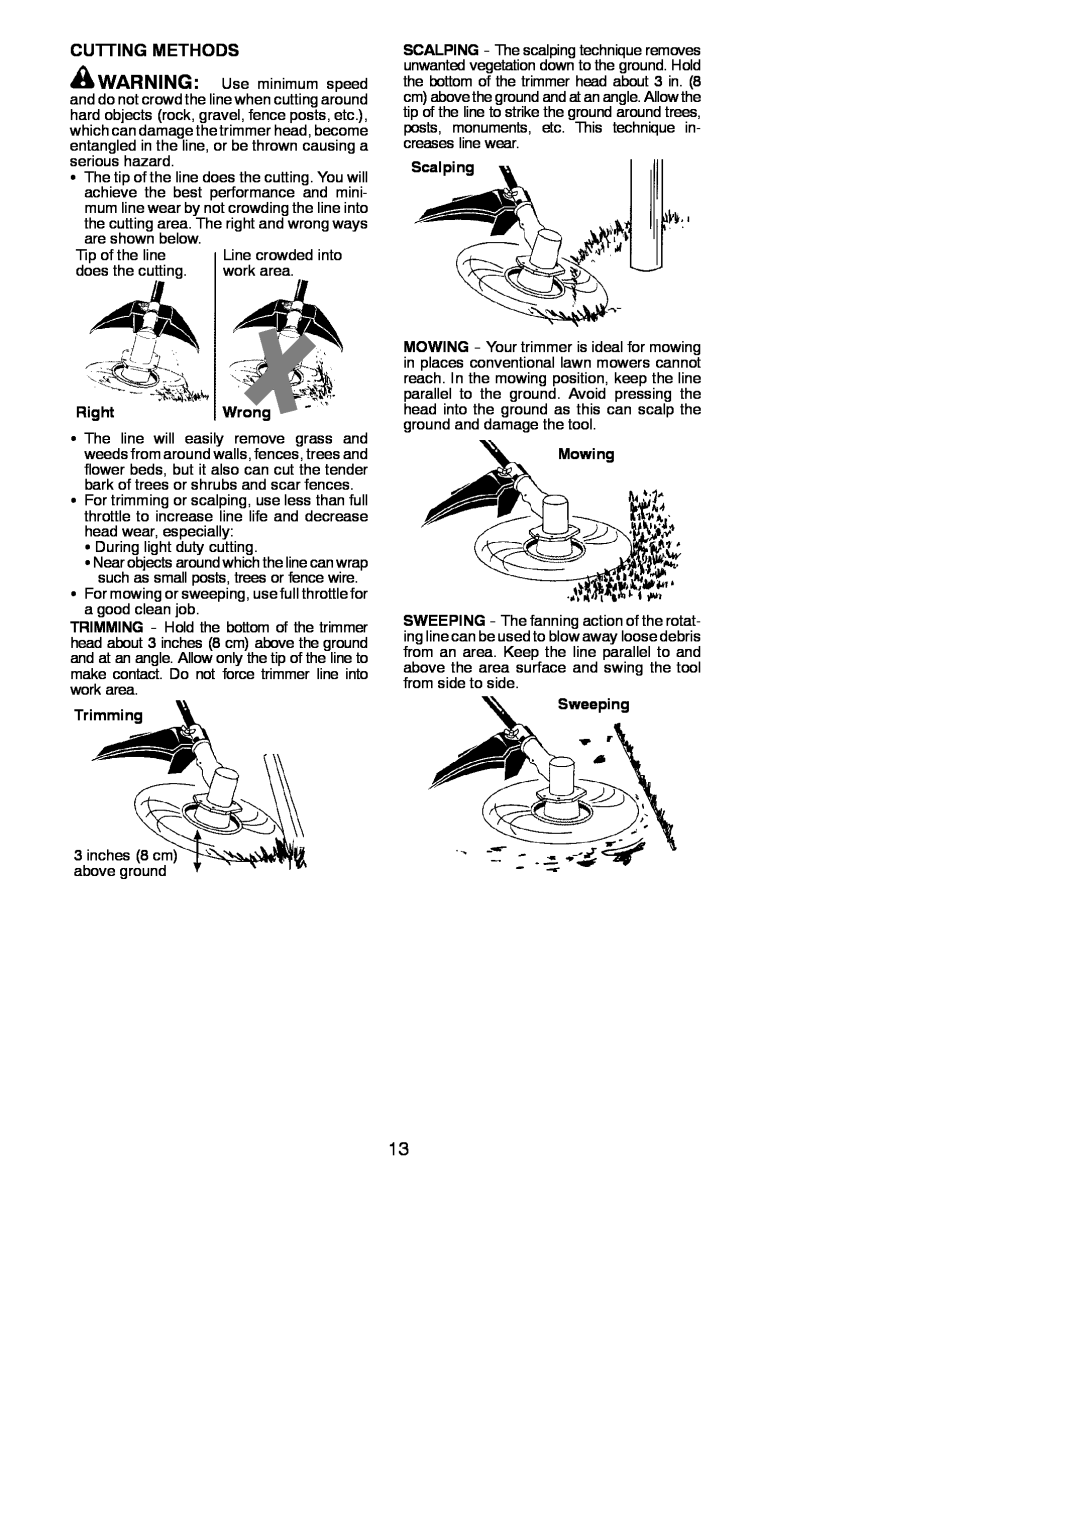 McCulloch 966625001, MC125, 115376827 instruction manual Cutting Methods, Scalping, RightWrong, Trimming, Mowing, Sweeping 